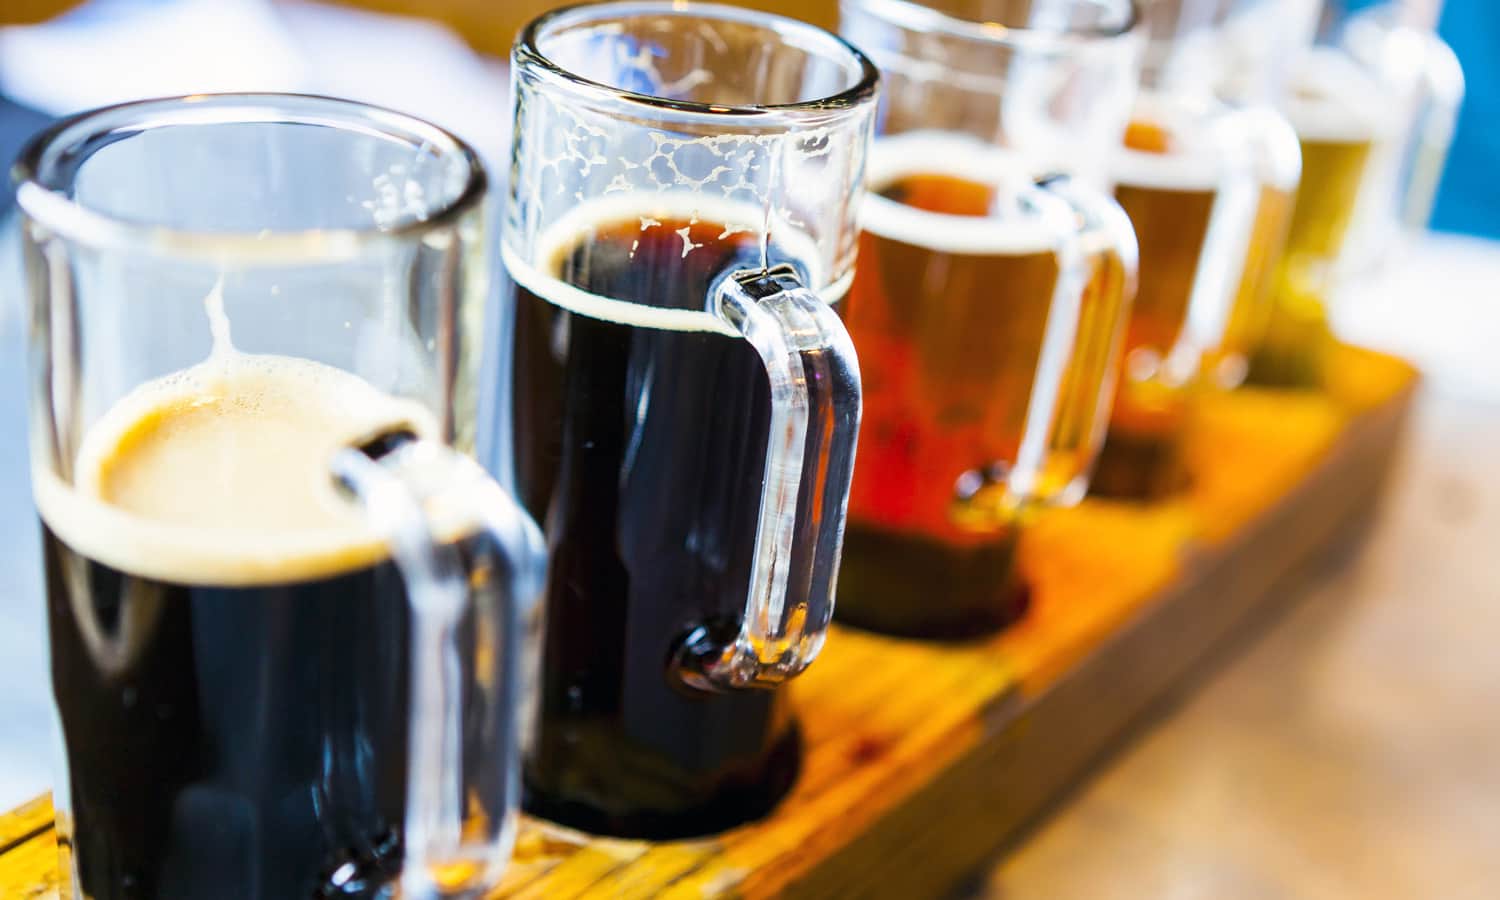 The beer industry is changing with the rise of gluten-free breweries around the world